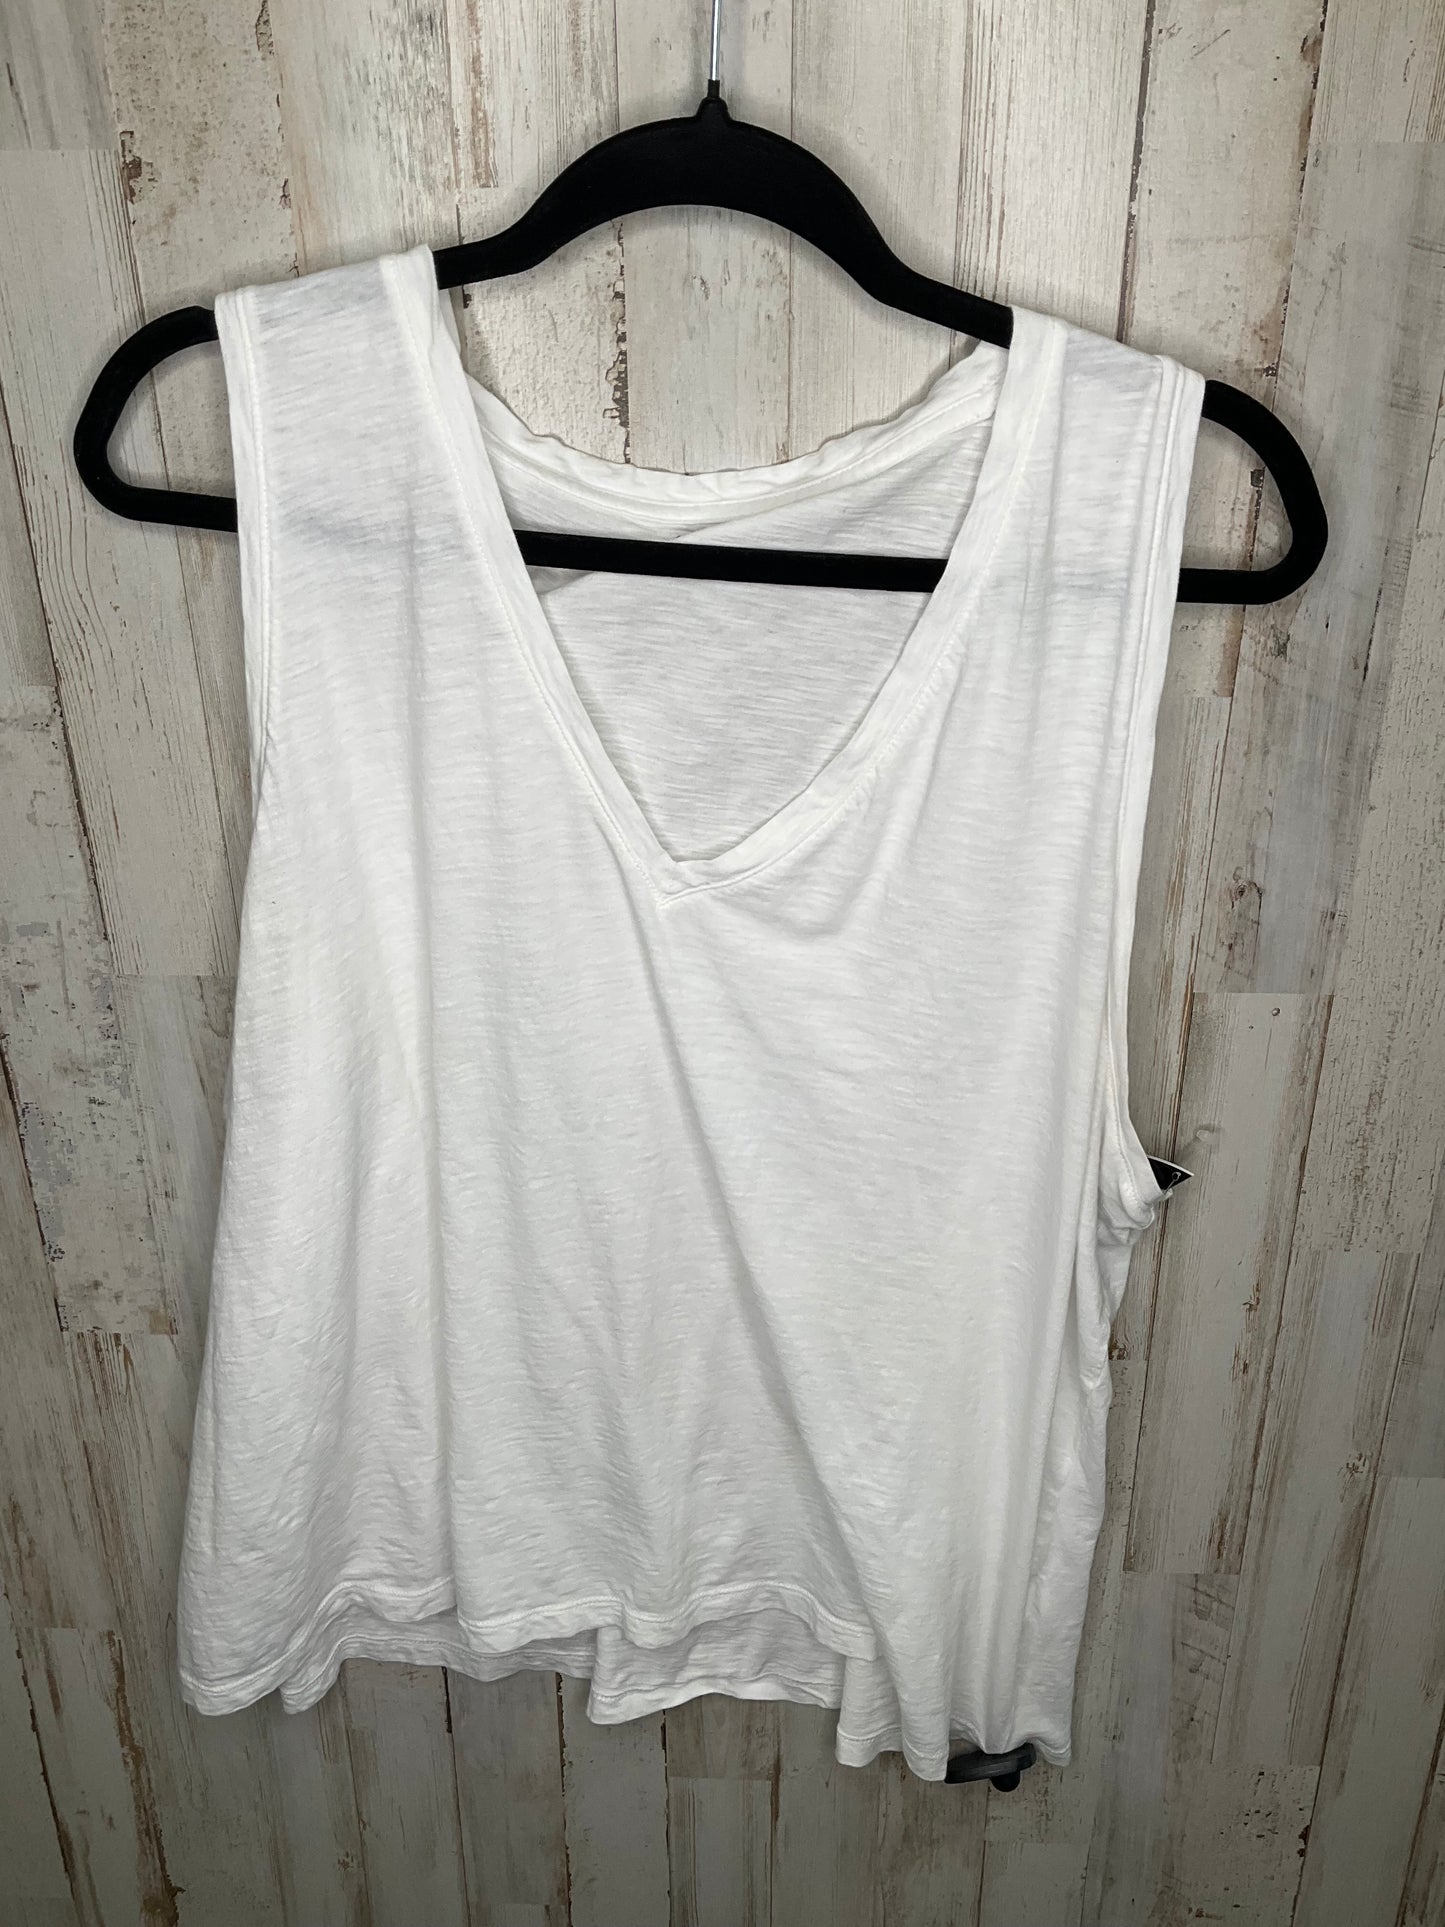 White Tank Top Madewell, Size 3x